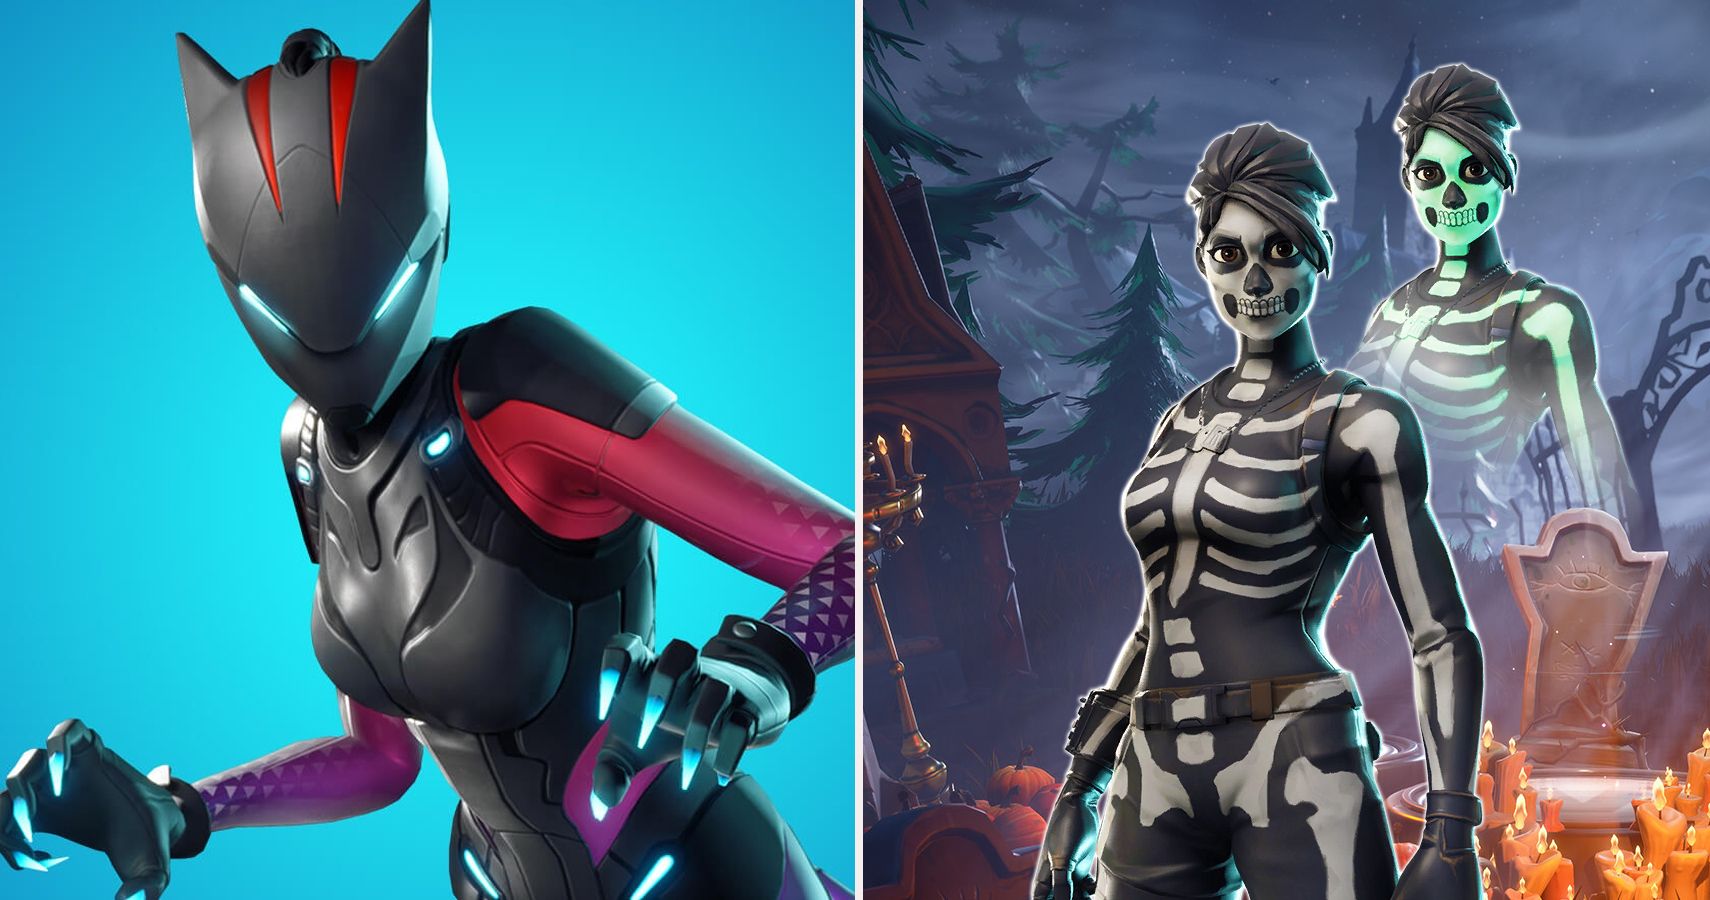 Here are the 10 coolest skins in Fortnite